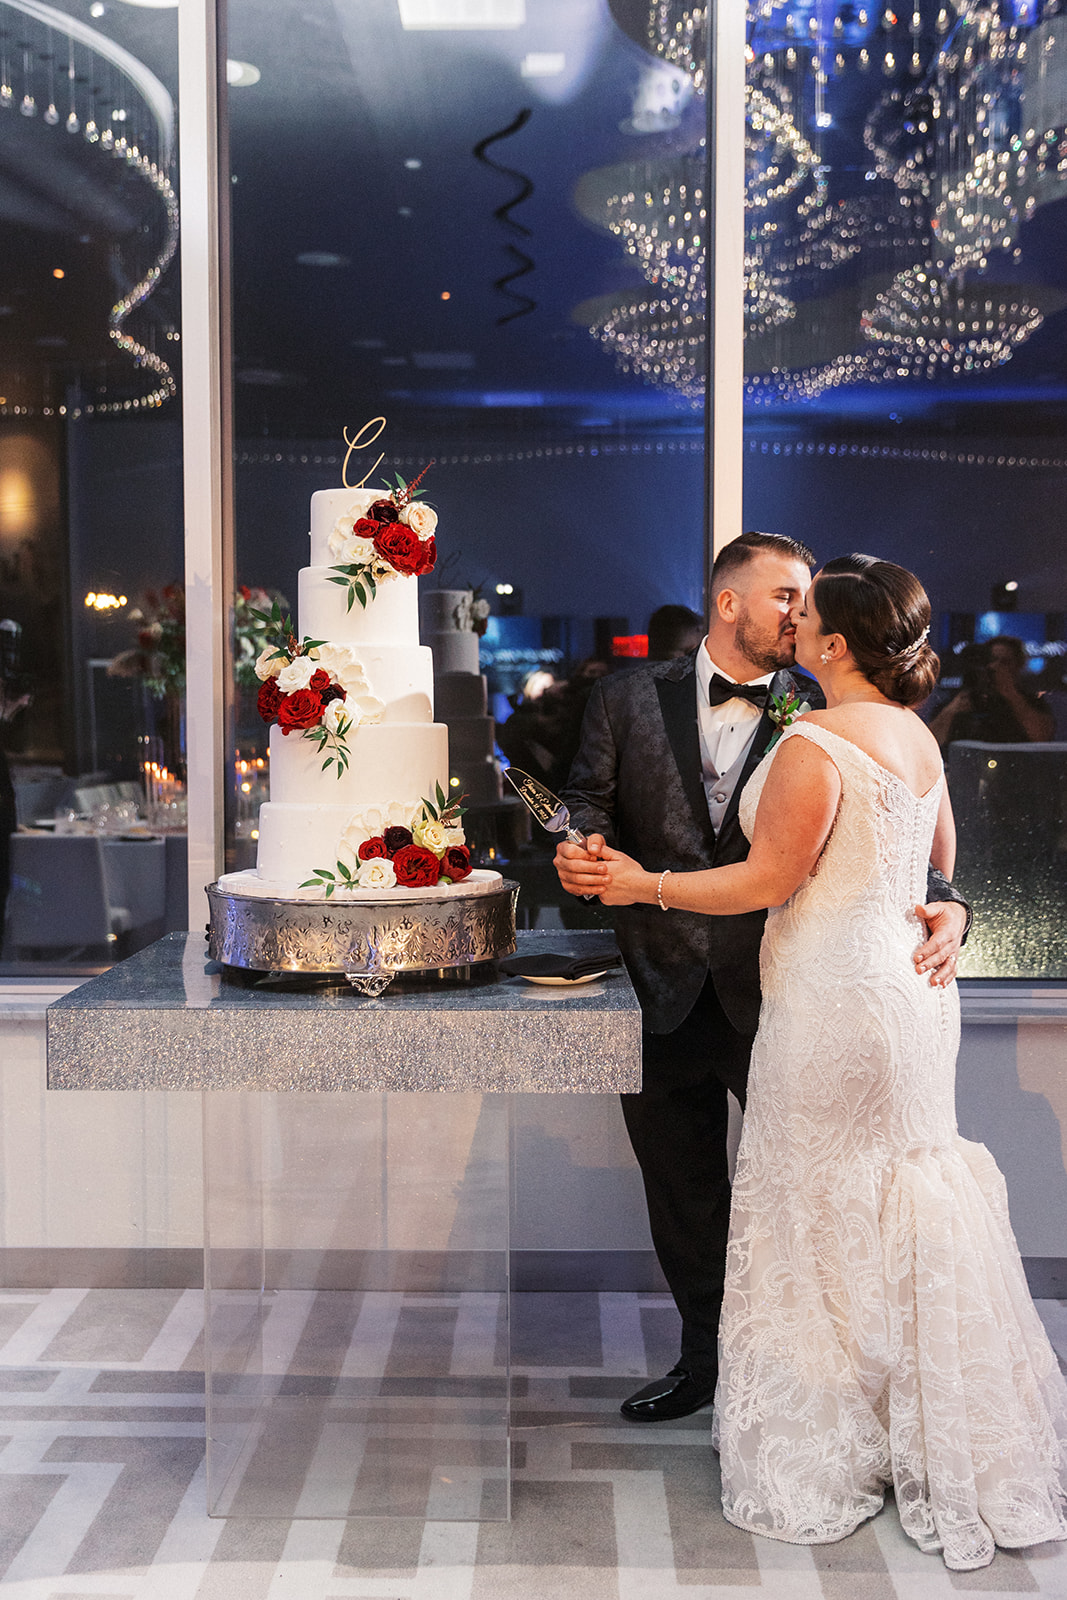 Newlyweds kiss while cutting their 5 tier cake at their Above Weddings